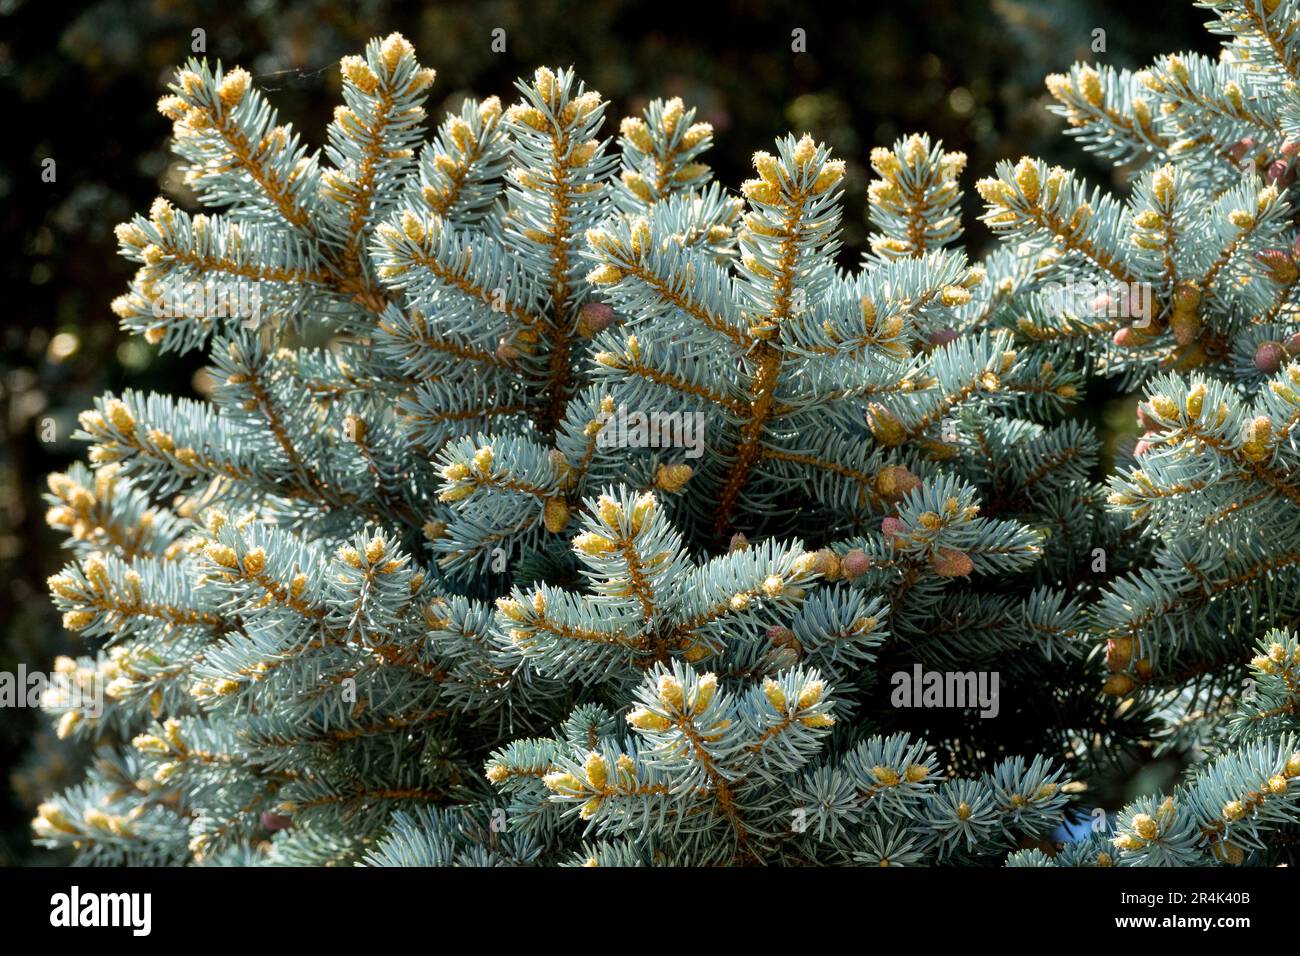 Silver Spruce, Twigs, Picea pungens 'Hoopsii' Stock Photo